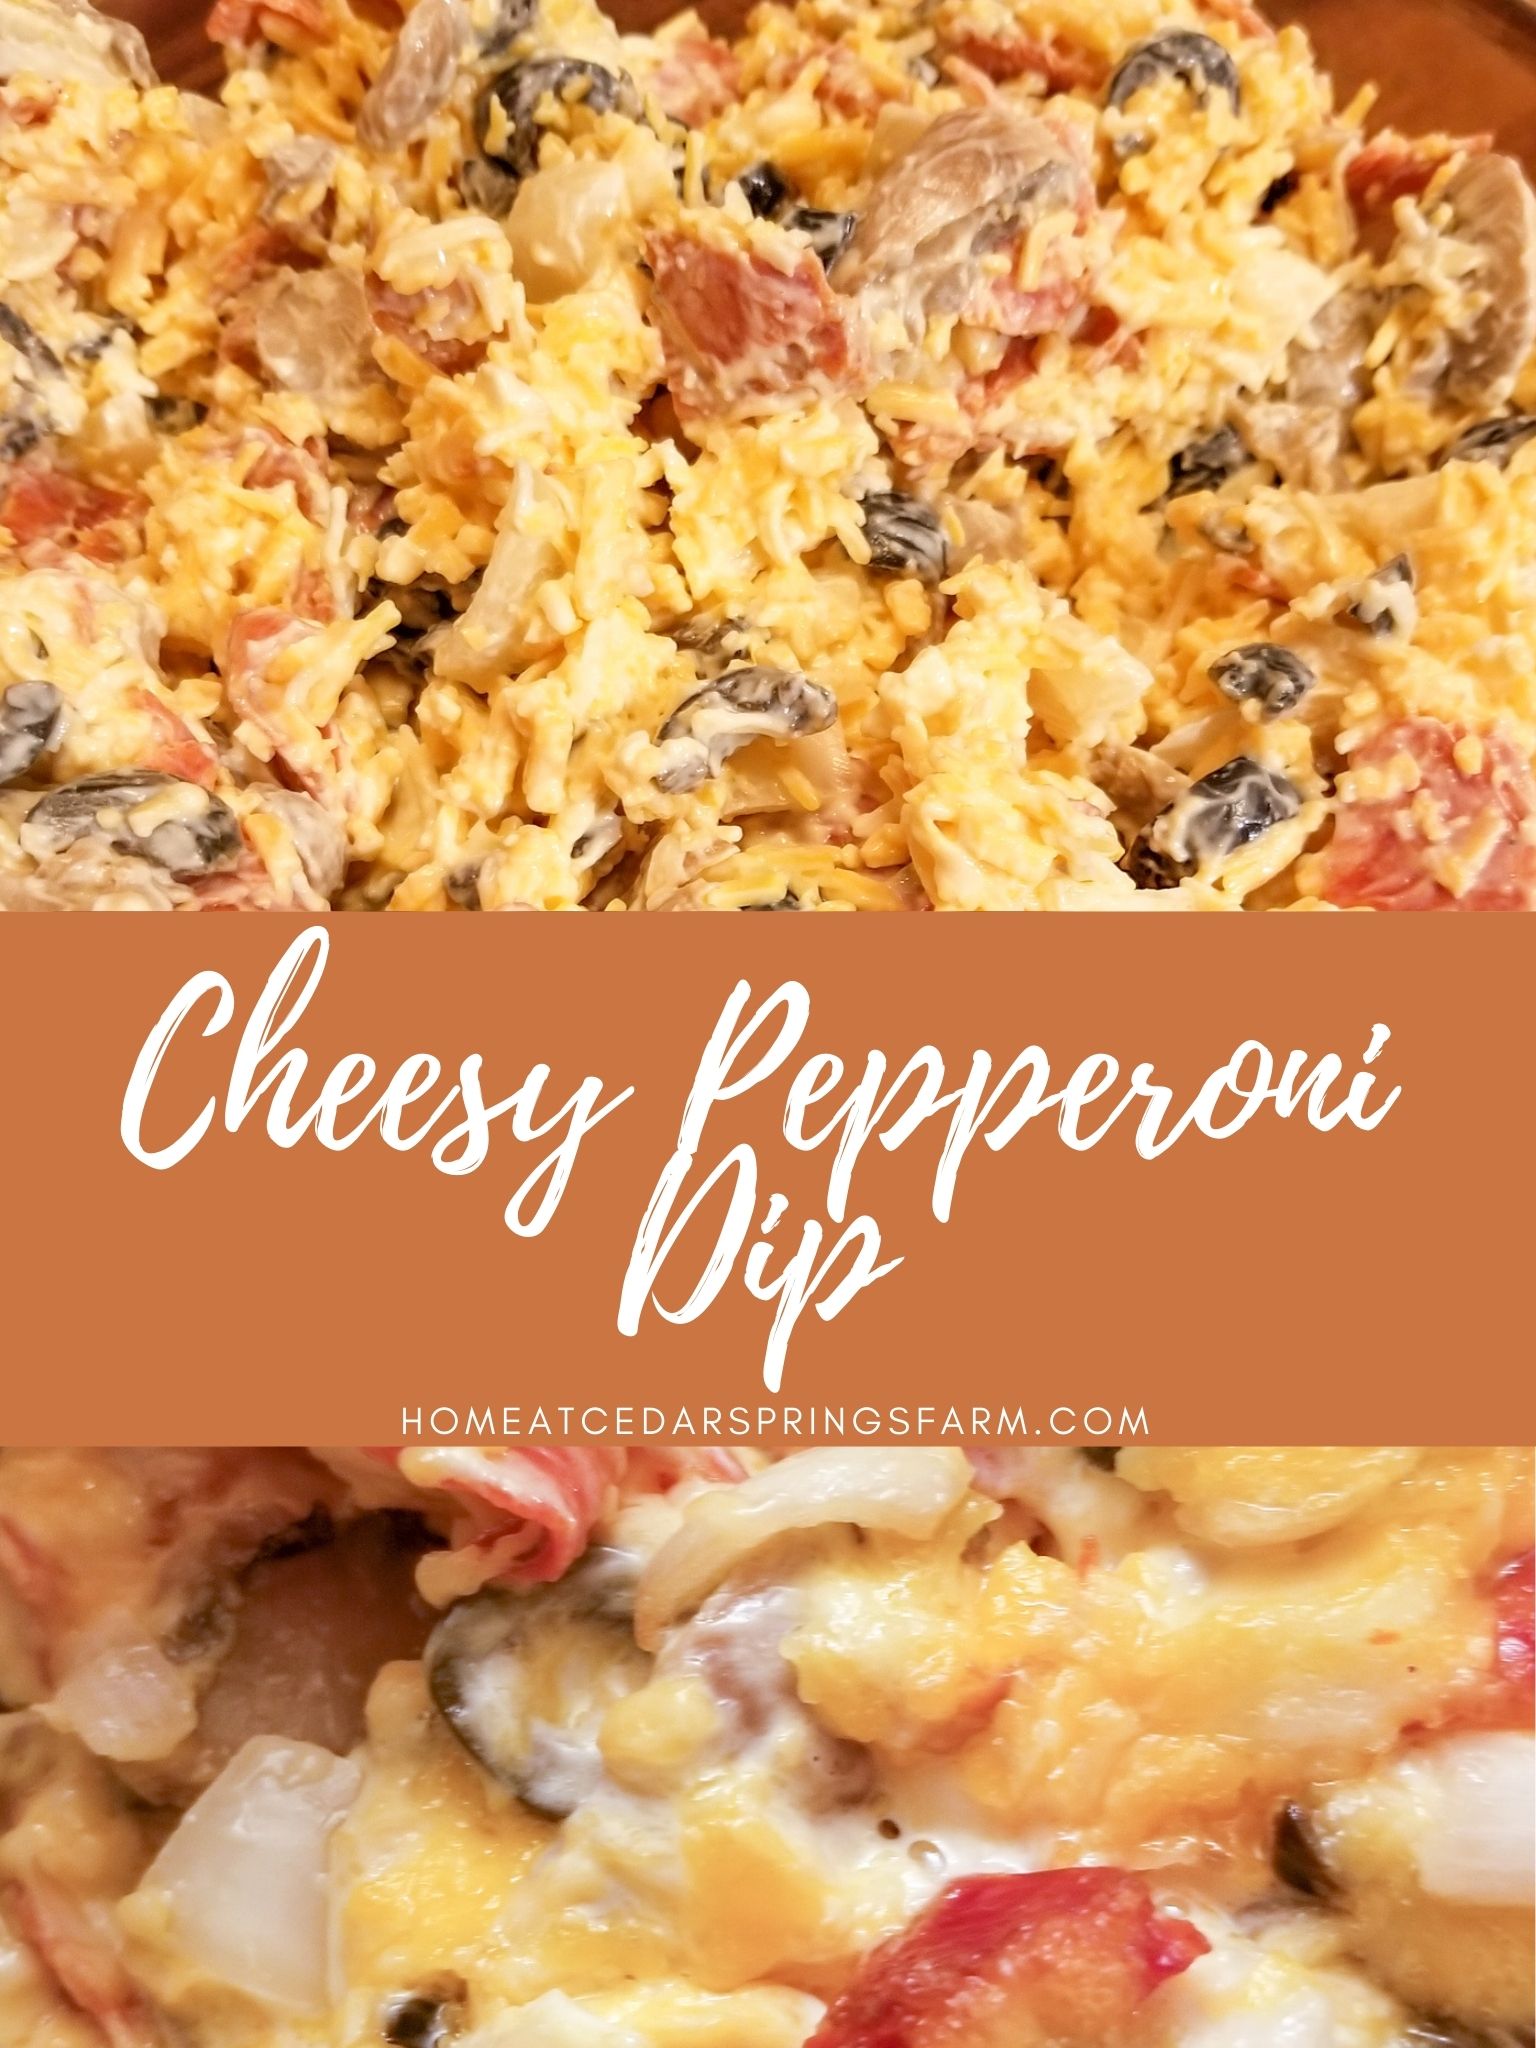 Baked Cheesy Pepperoni Dip